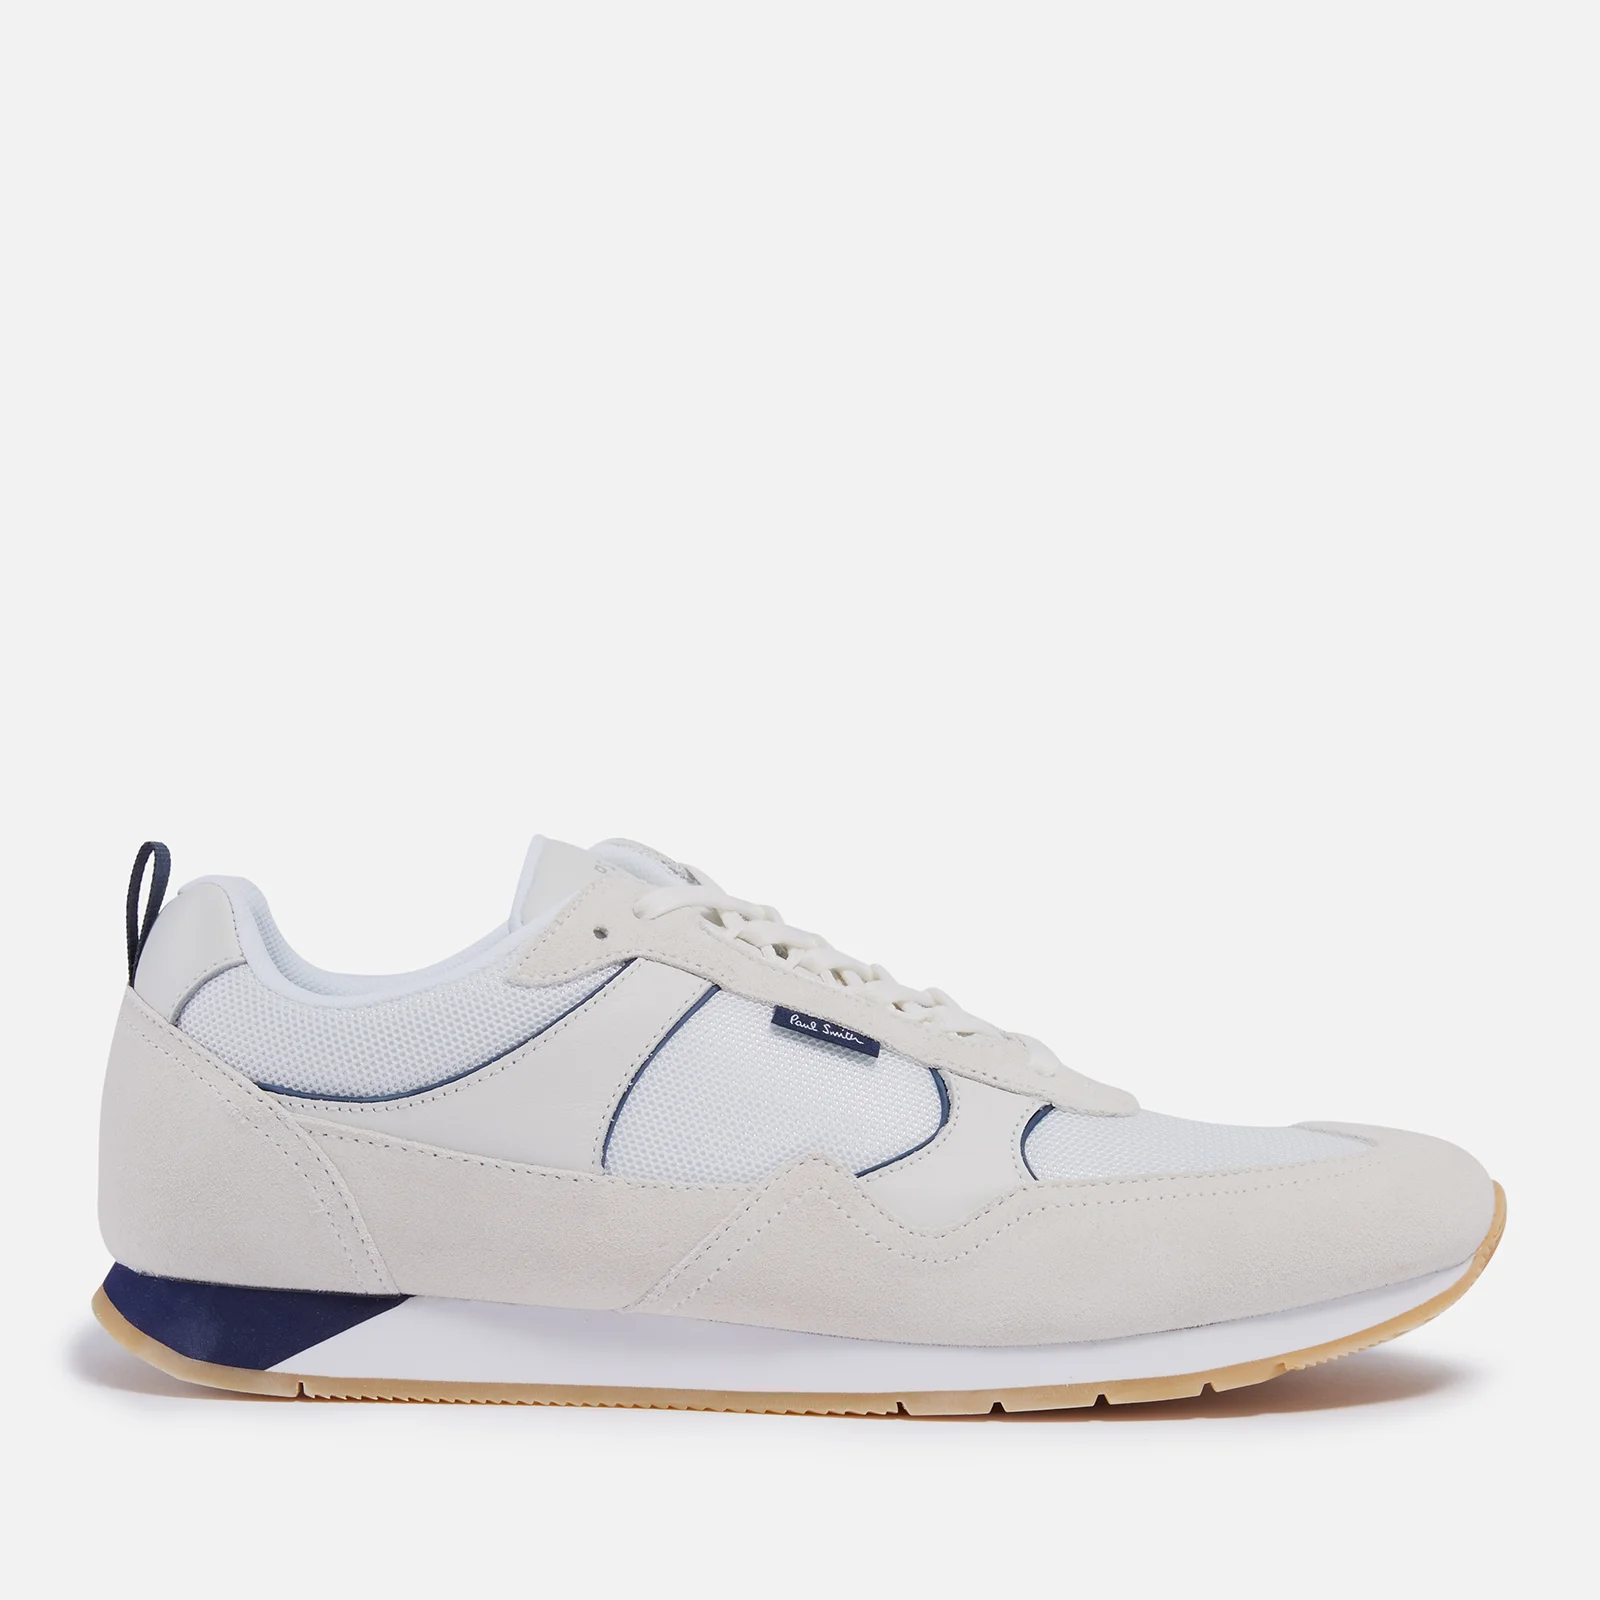 PS Paul Smith Men's Will Running Style Trainers - White Image 1